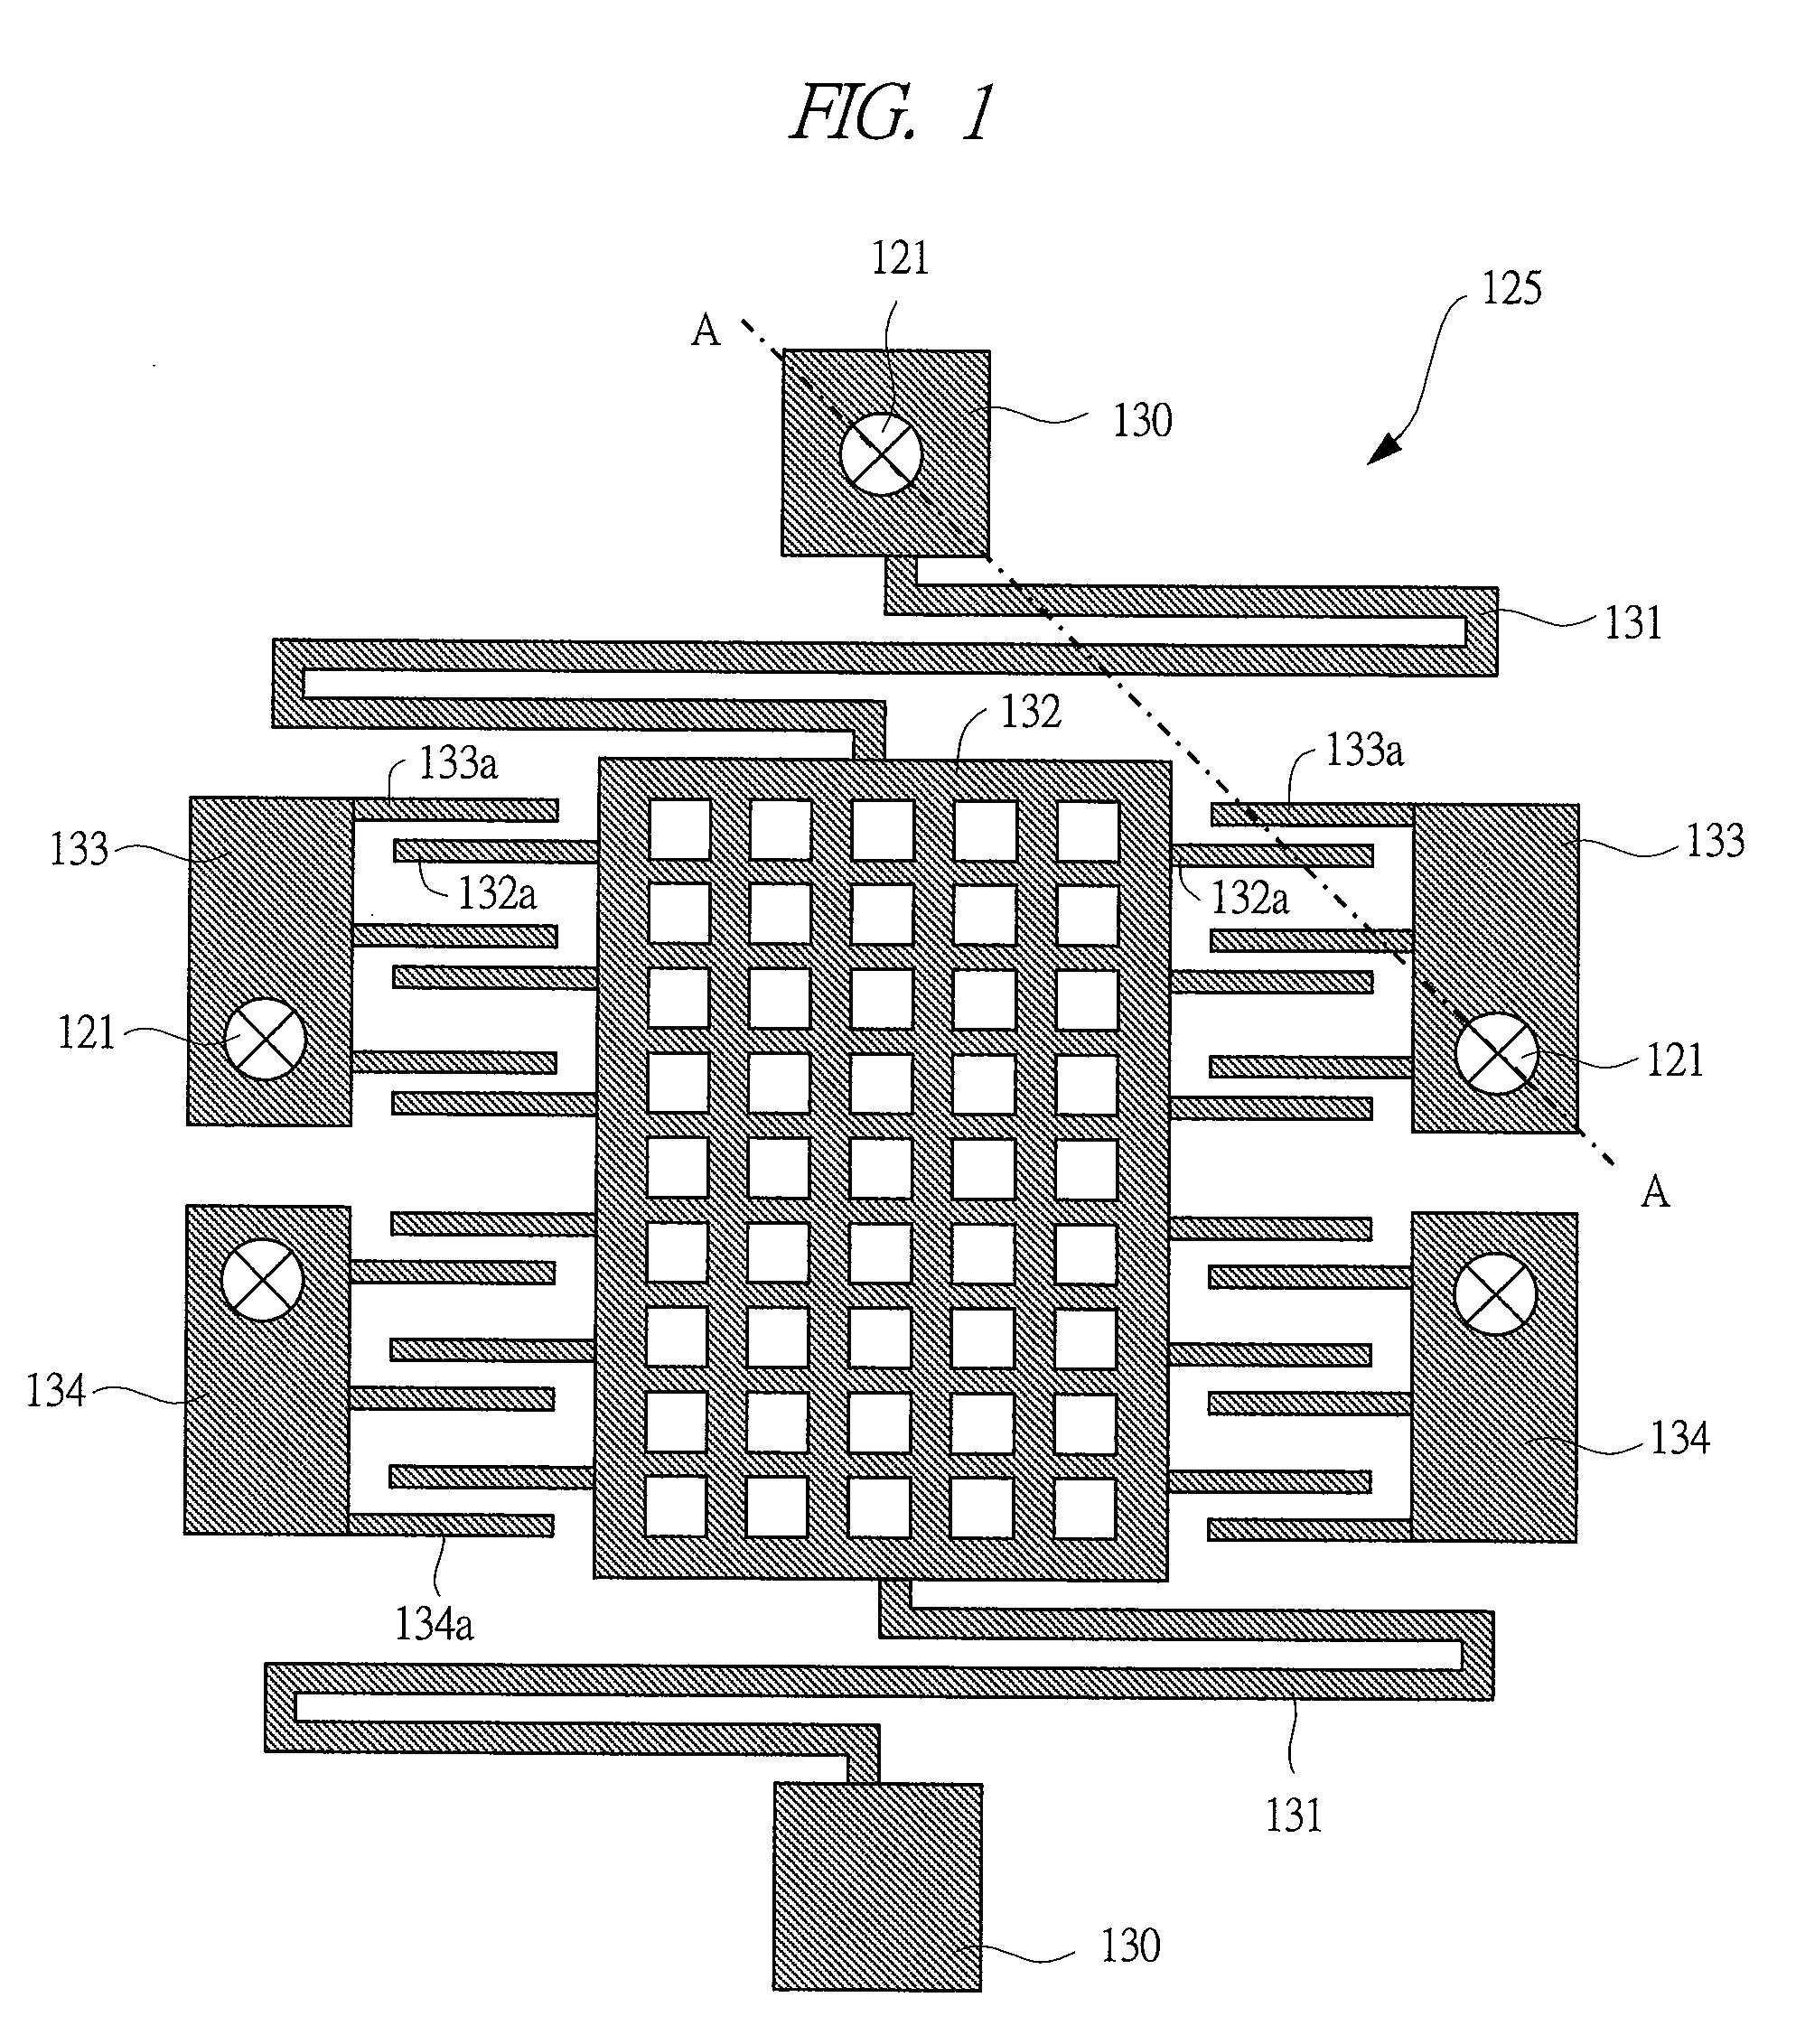 Semiconductor device with integrated circuit electrically connected to a MEMS sensor by a through-electrode